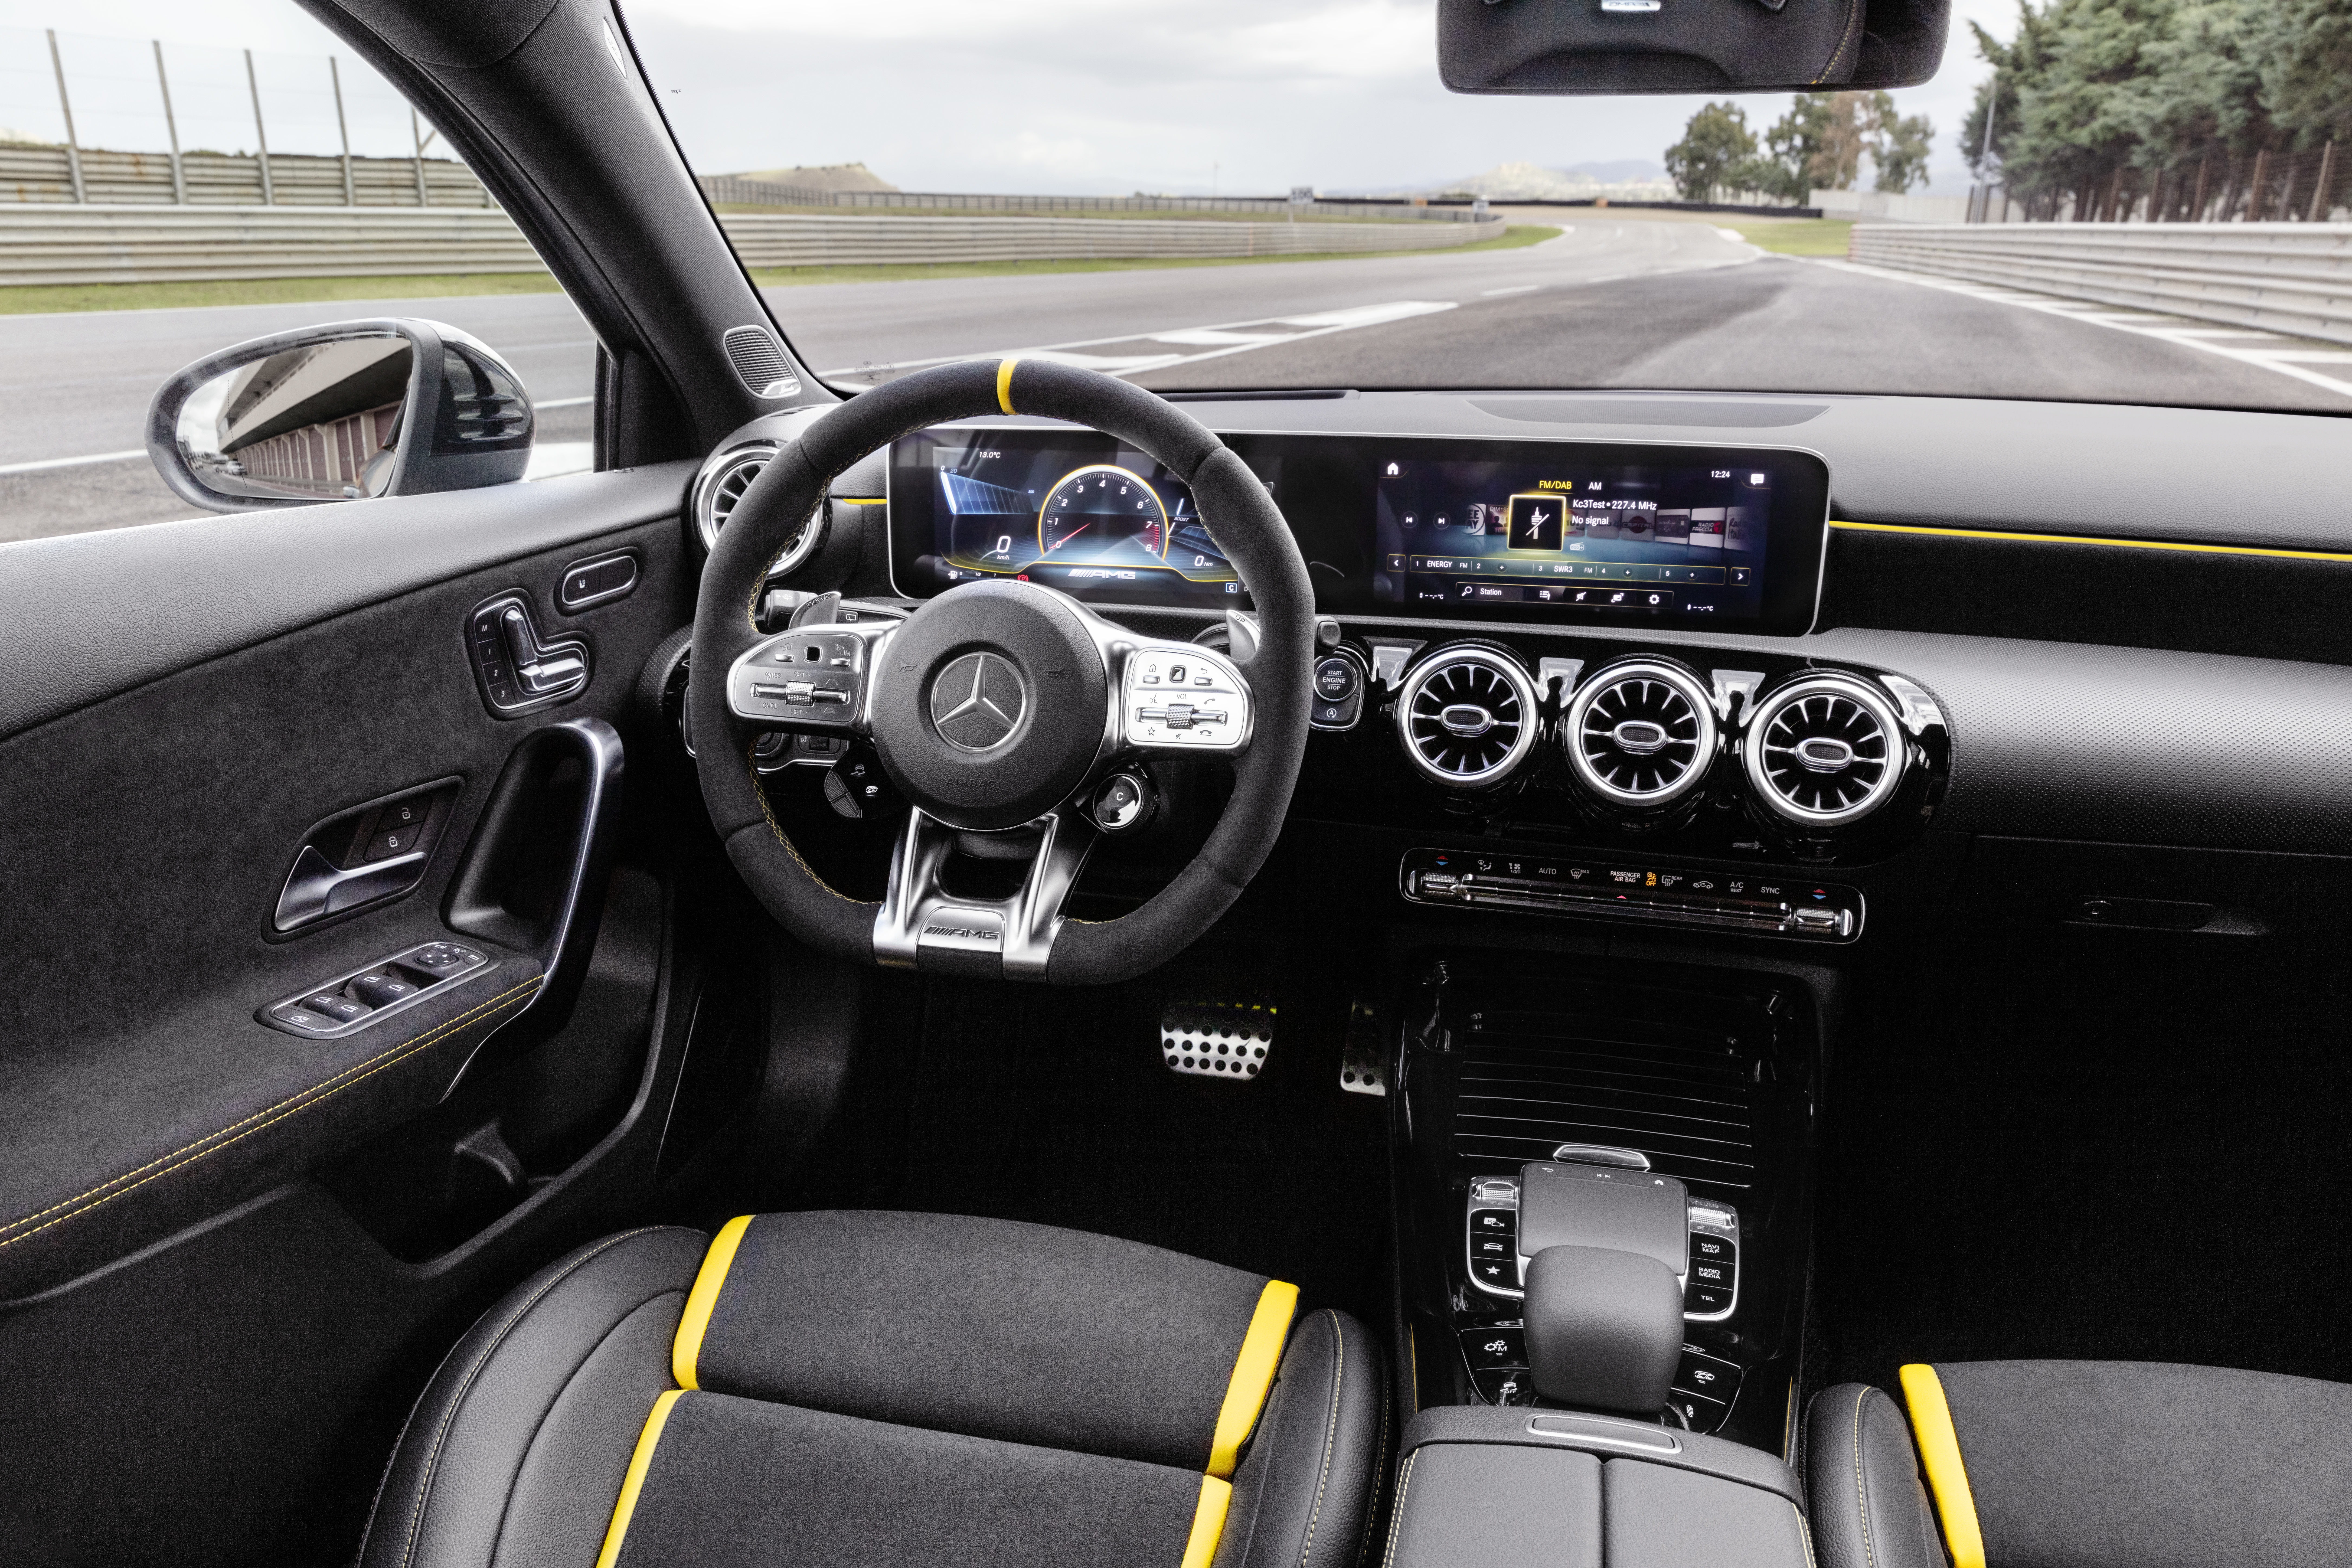 The interior features racing seats and matching steering wheel